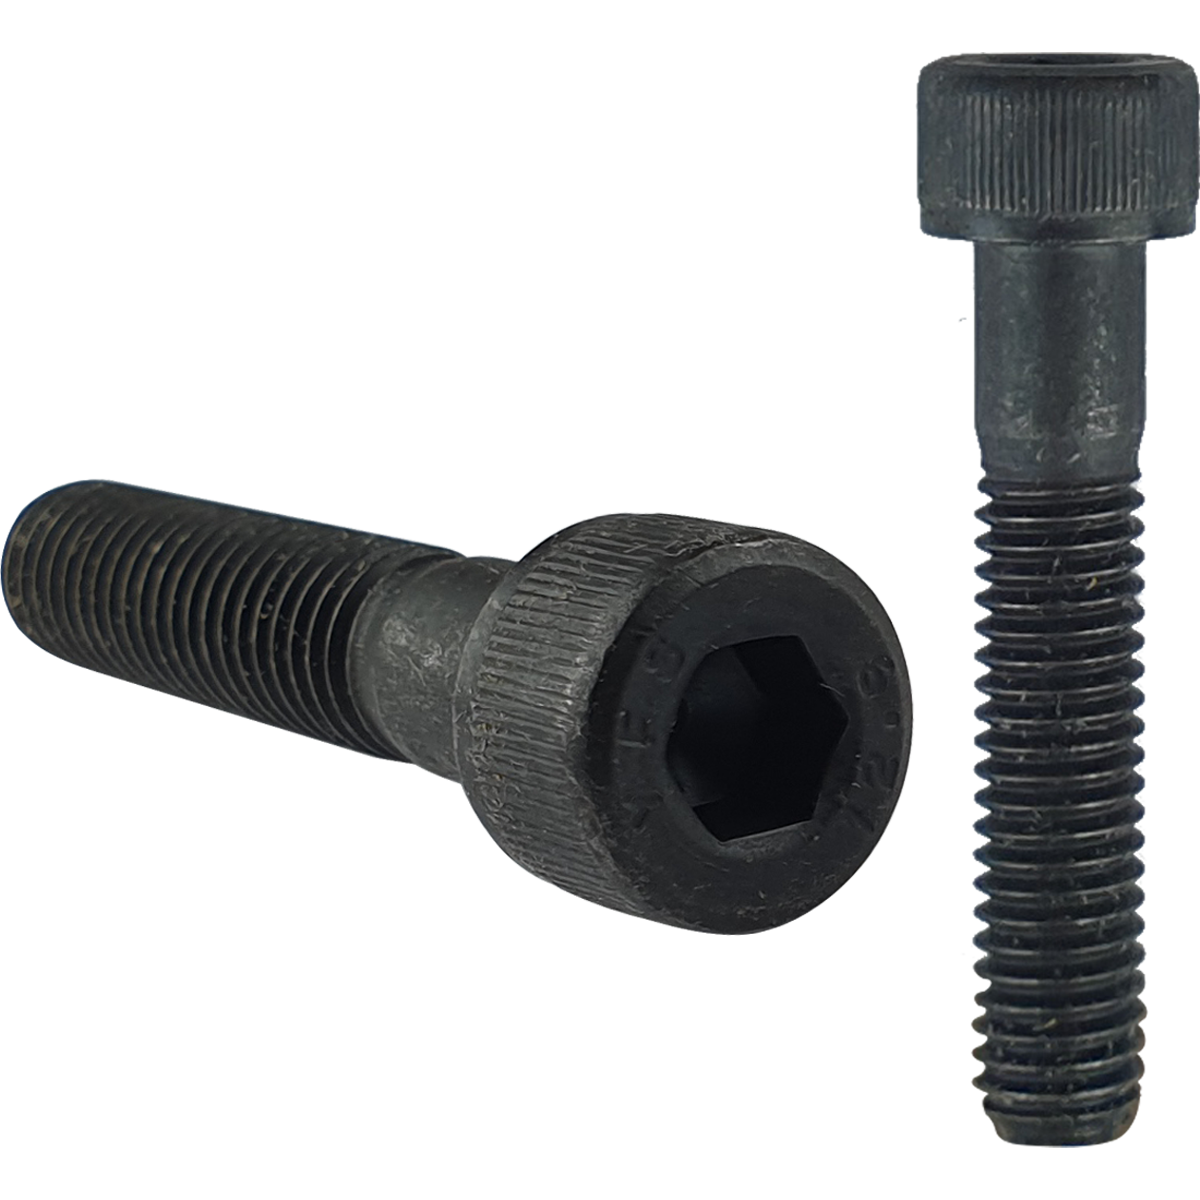 Self-colour socket cap head machine screws, also known as socket cap screws with a unified national fine thread (UNF). Numerous sizes available at competitive prices.